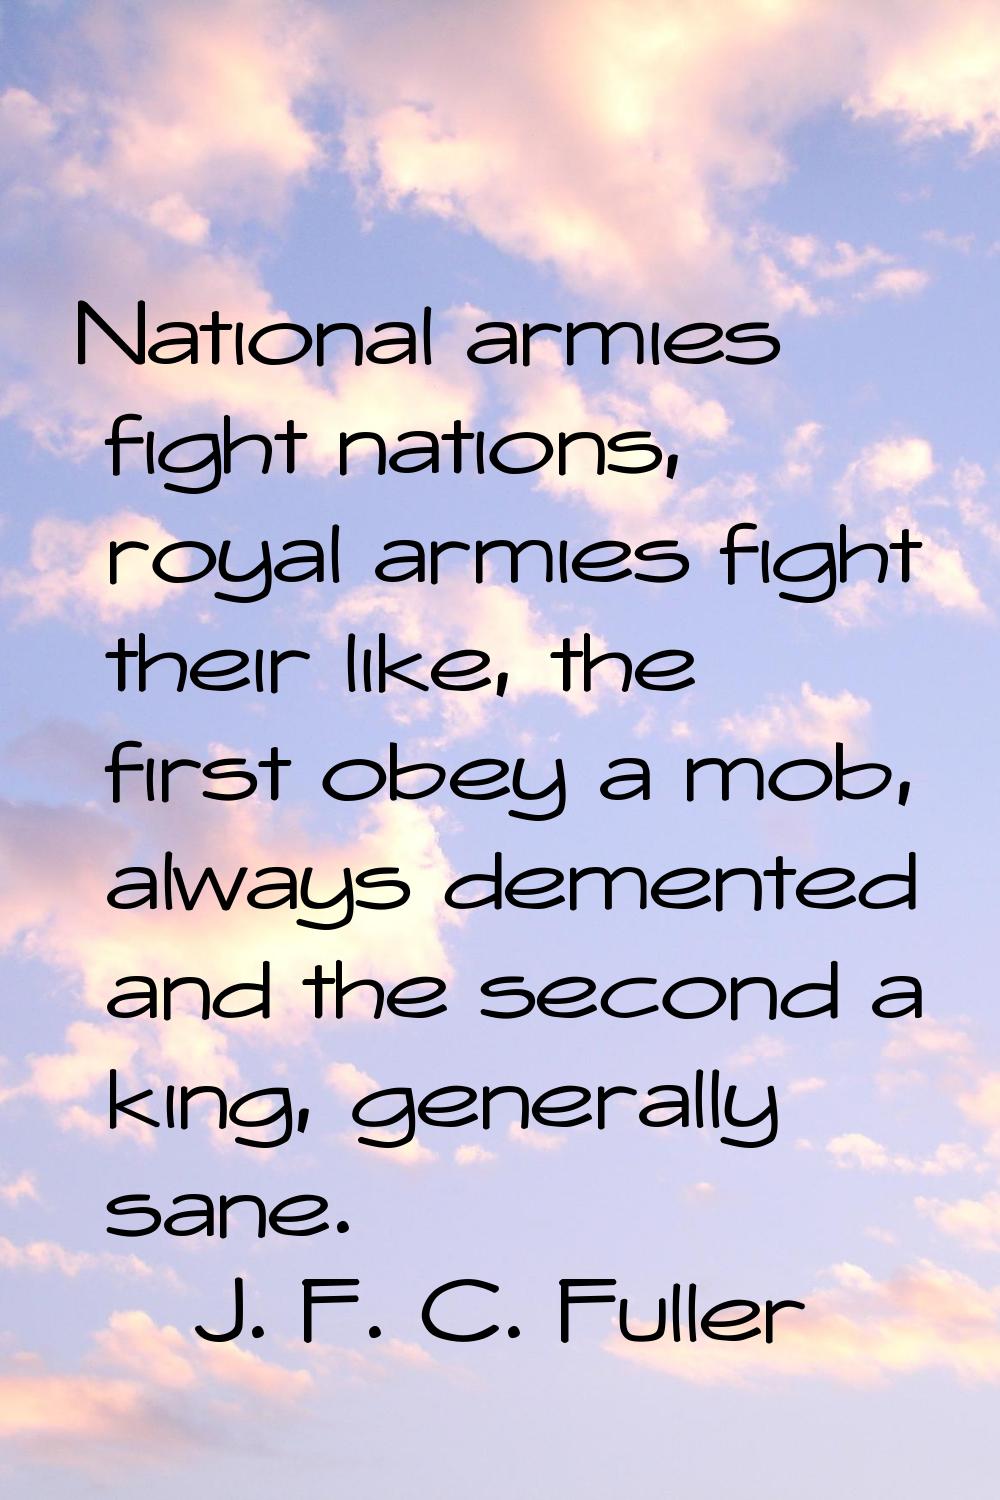 National armies fight nations, royal armies fight their like, the first obey a mob, always demented